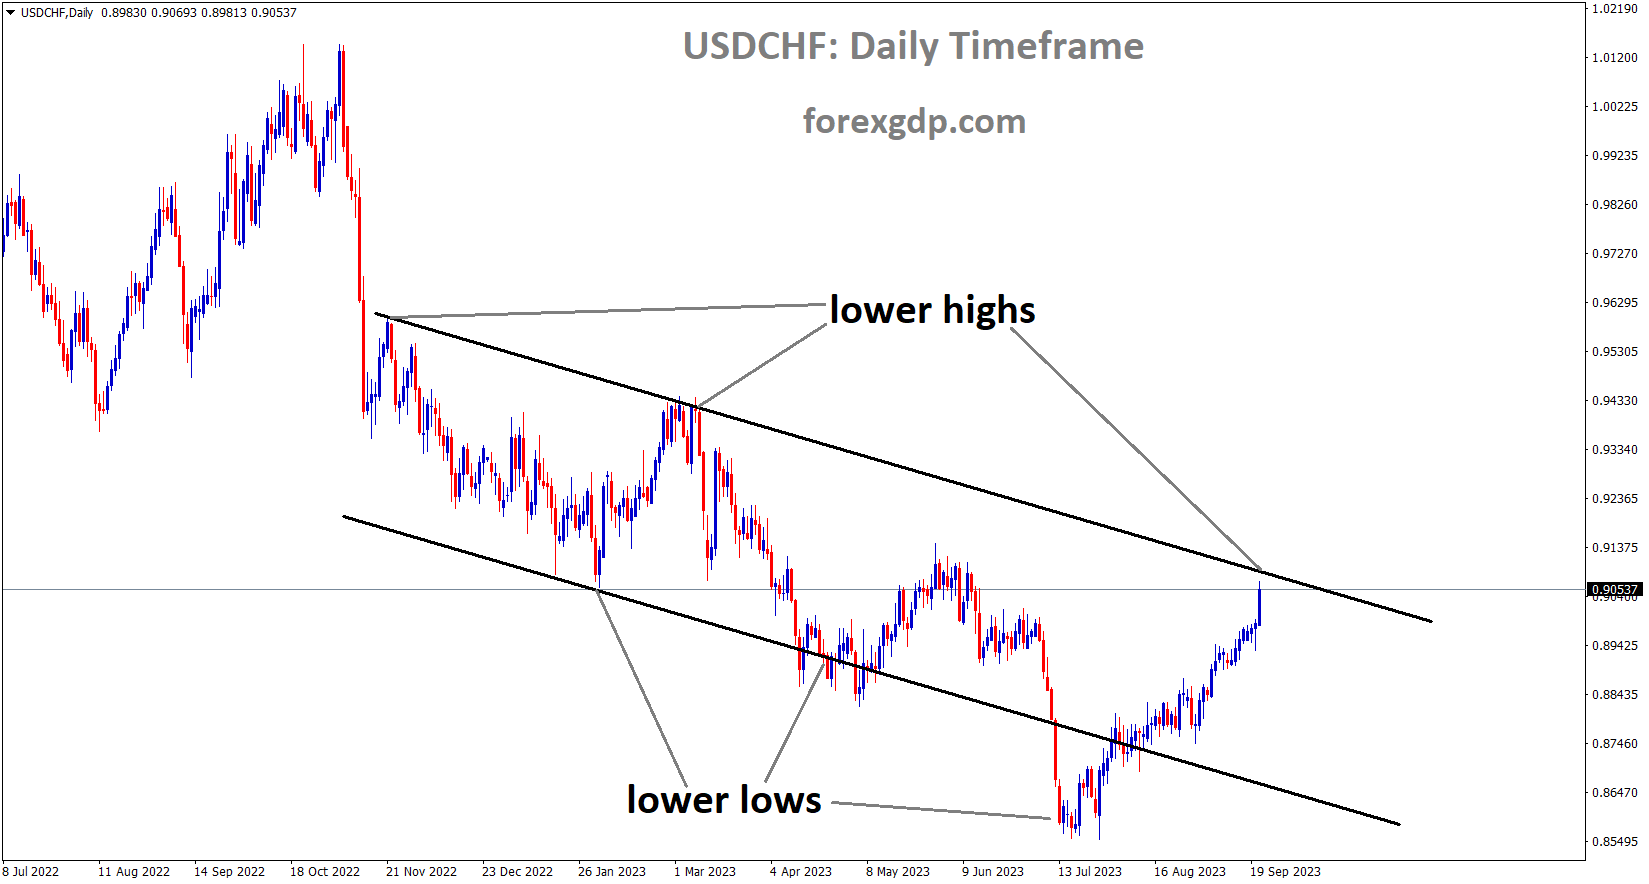 USDCHF is moving in the Descending channel and the market has reached the lower high area of the channel